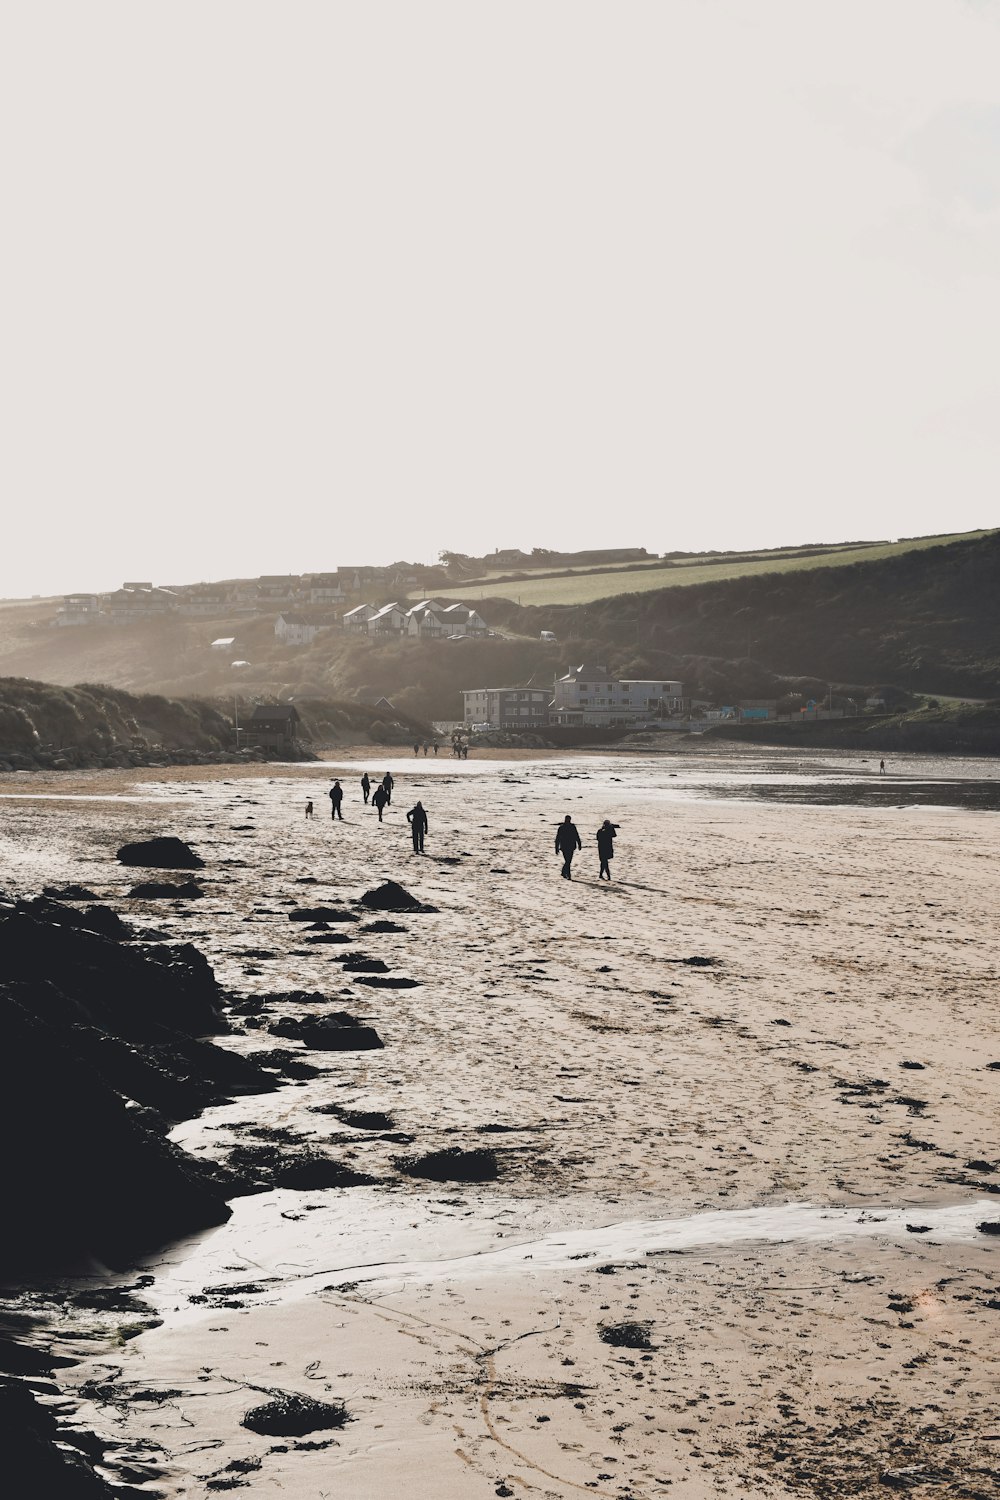 a group of people walking along a sandy beach